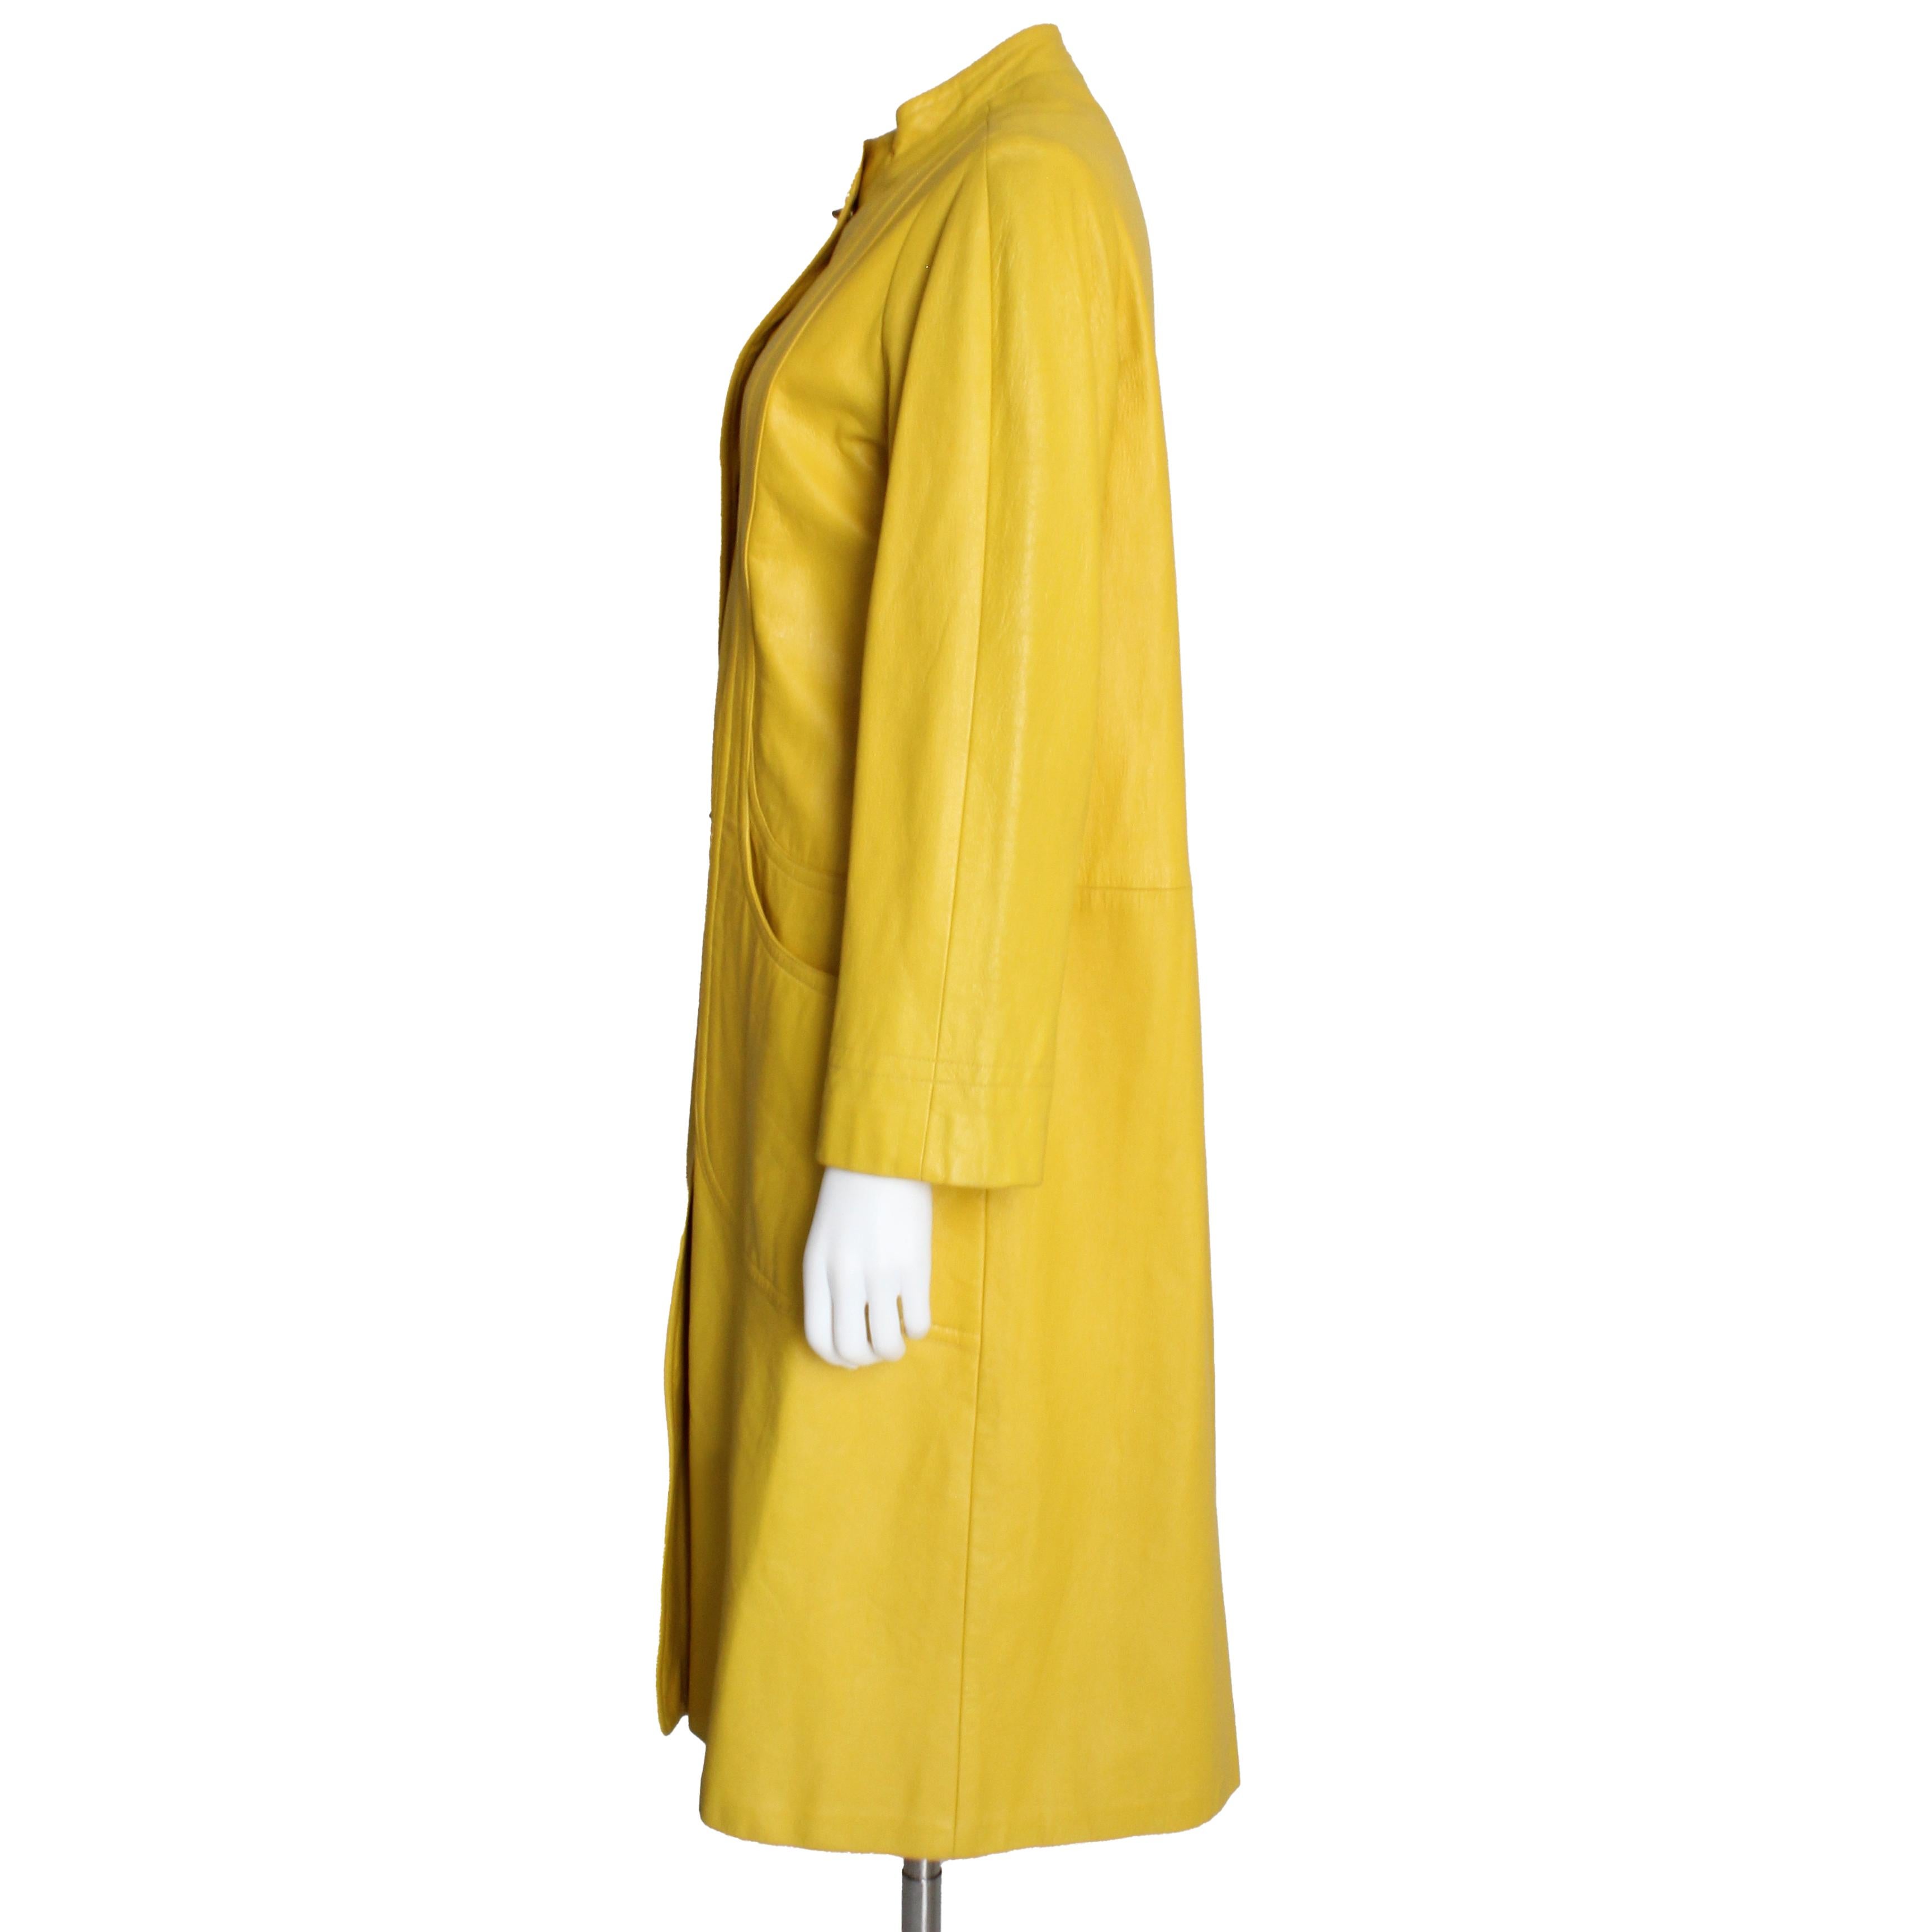 Bonnie Cashin for Sills Coat Long Leather Jacket Bright Yellow Mod Vintage 60s  For Sale 2